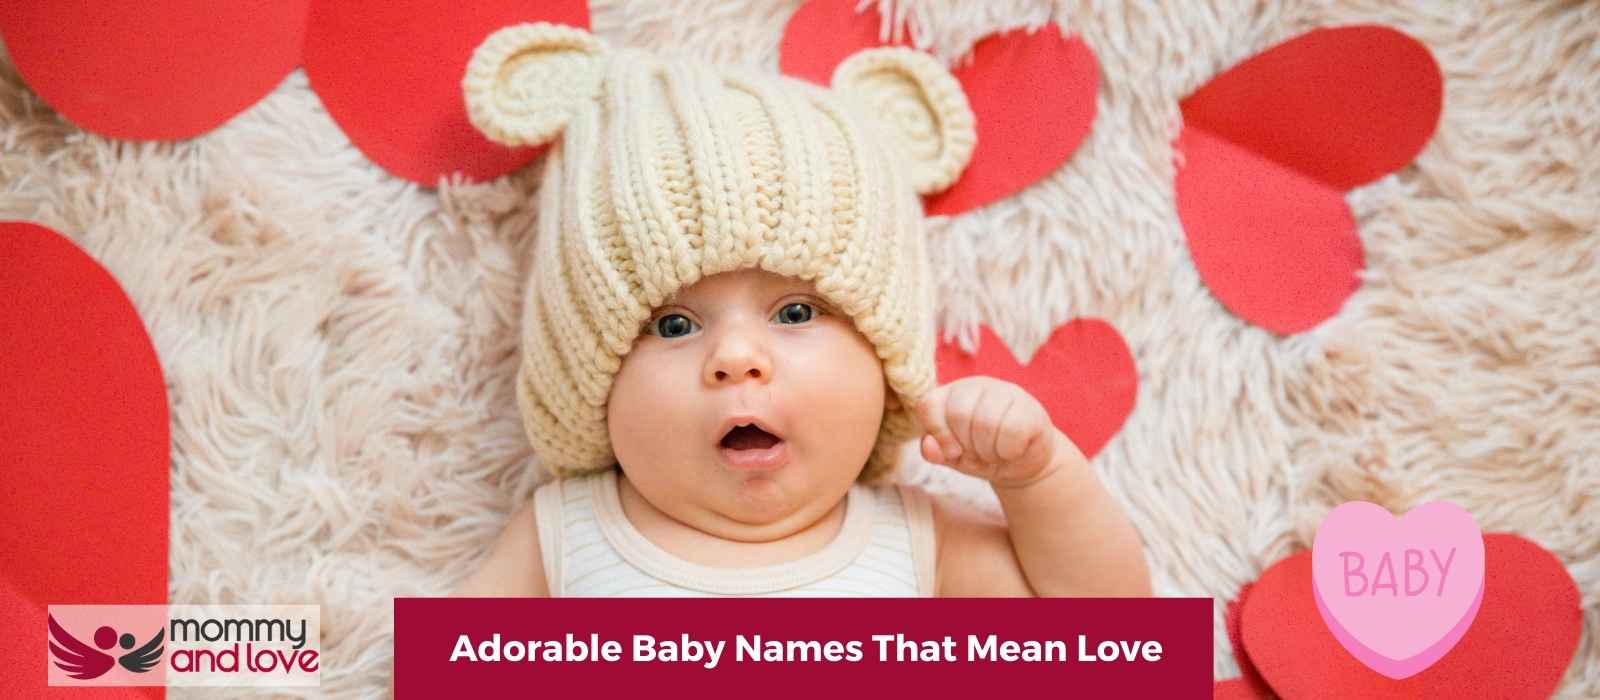 99 Adorable Baby Names That Mean Love